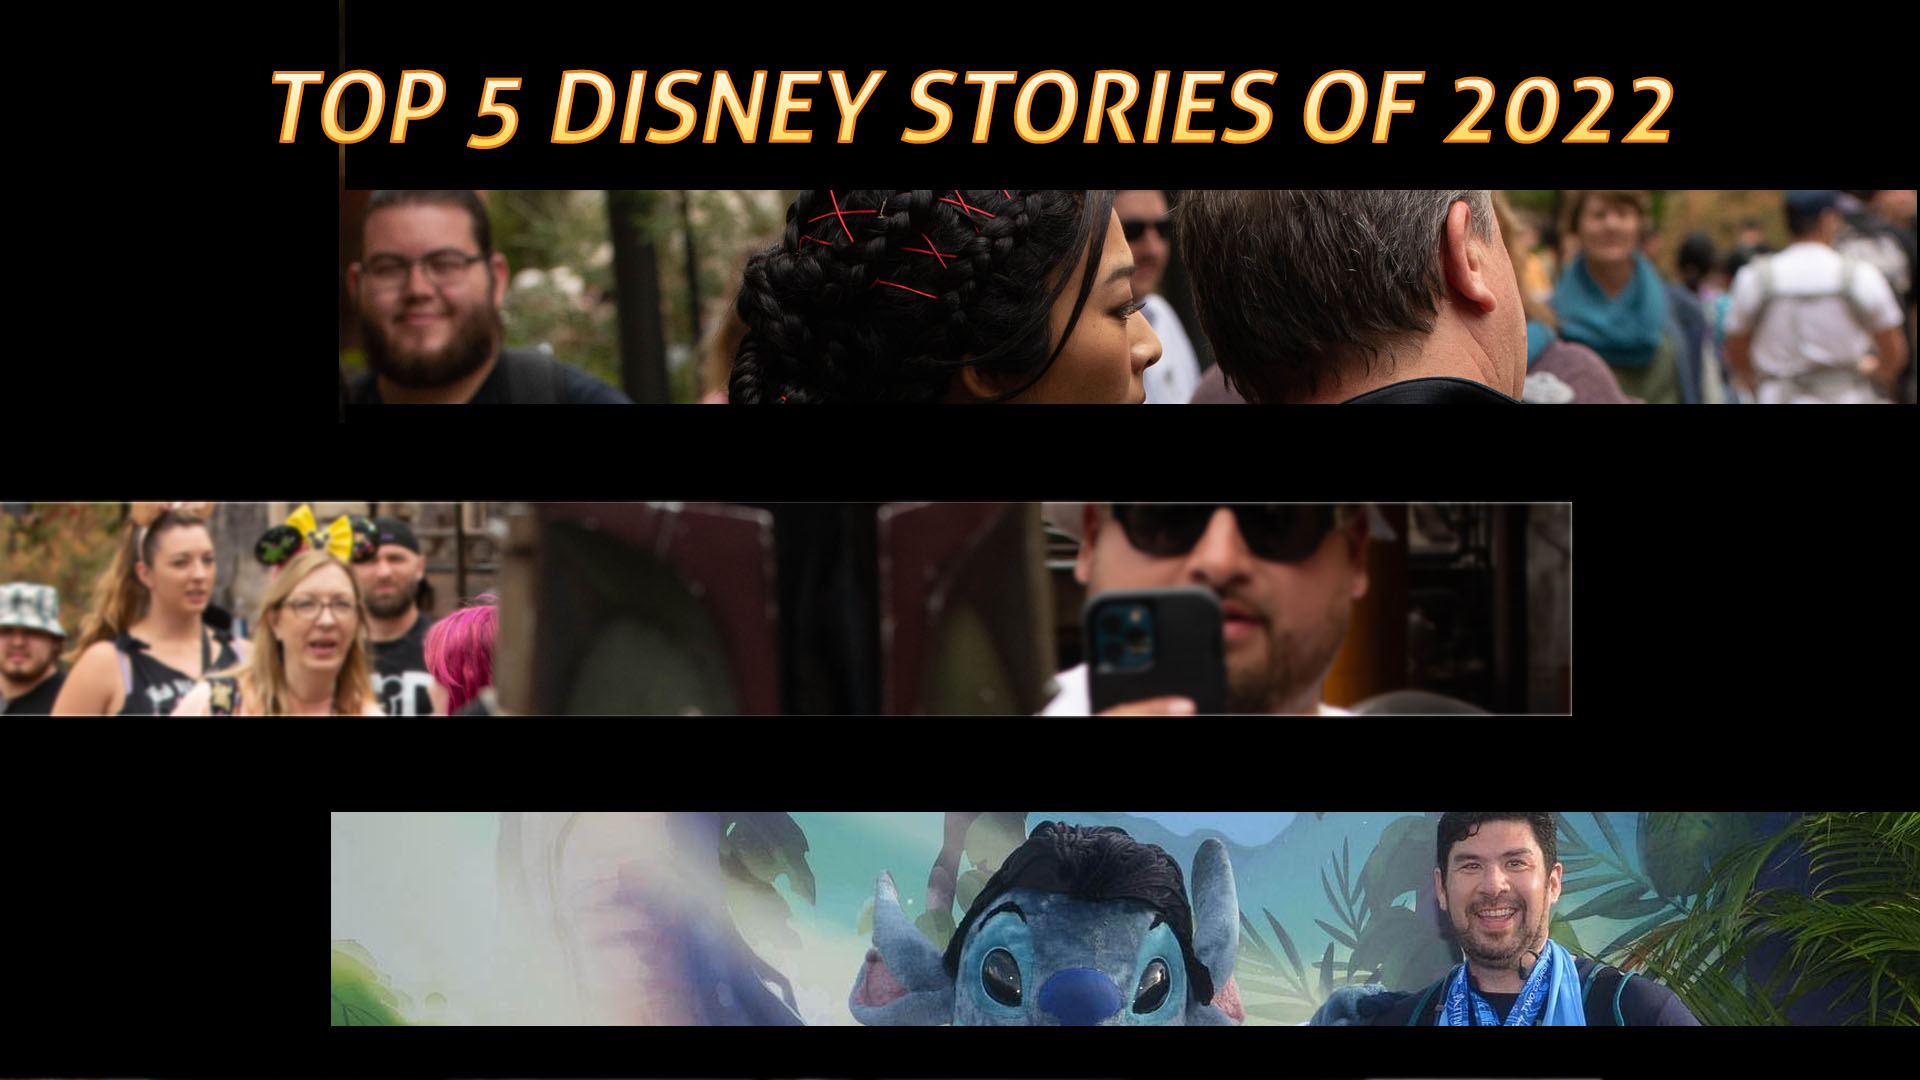 Top 5 Disney Stories of 2022: #2 Character Meet and Greets Return